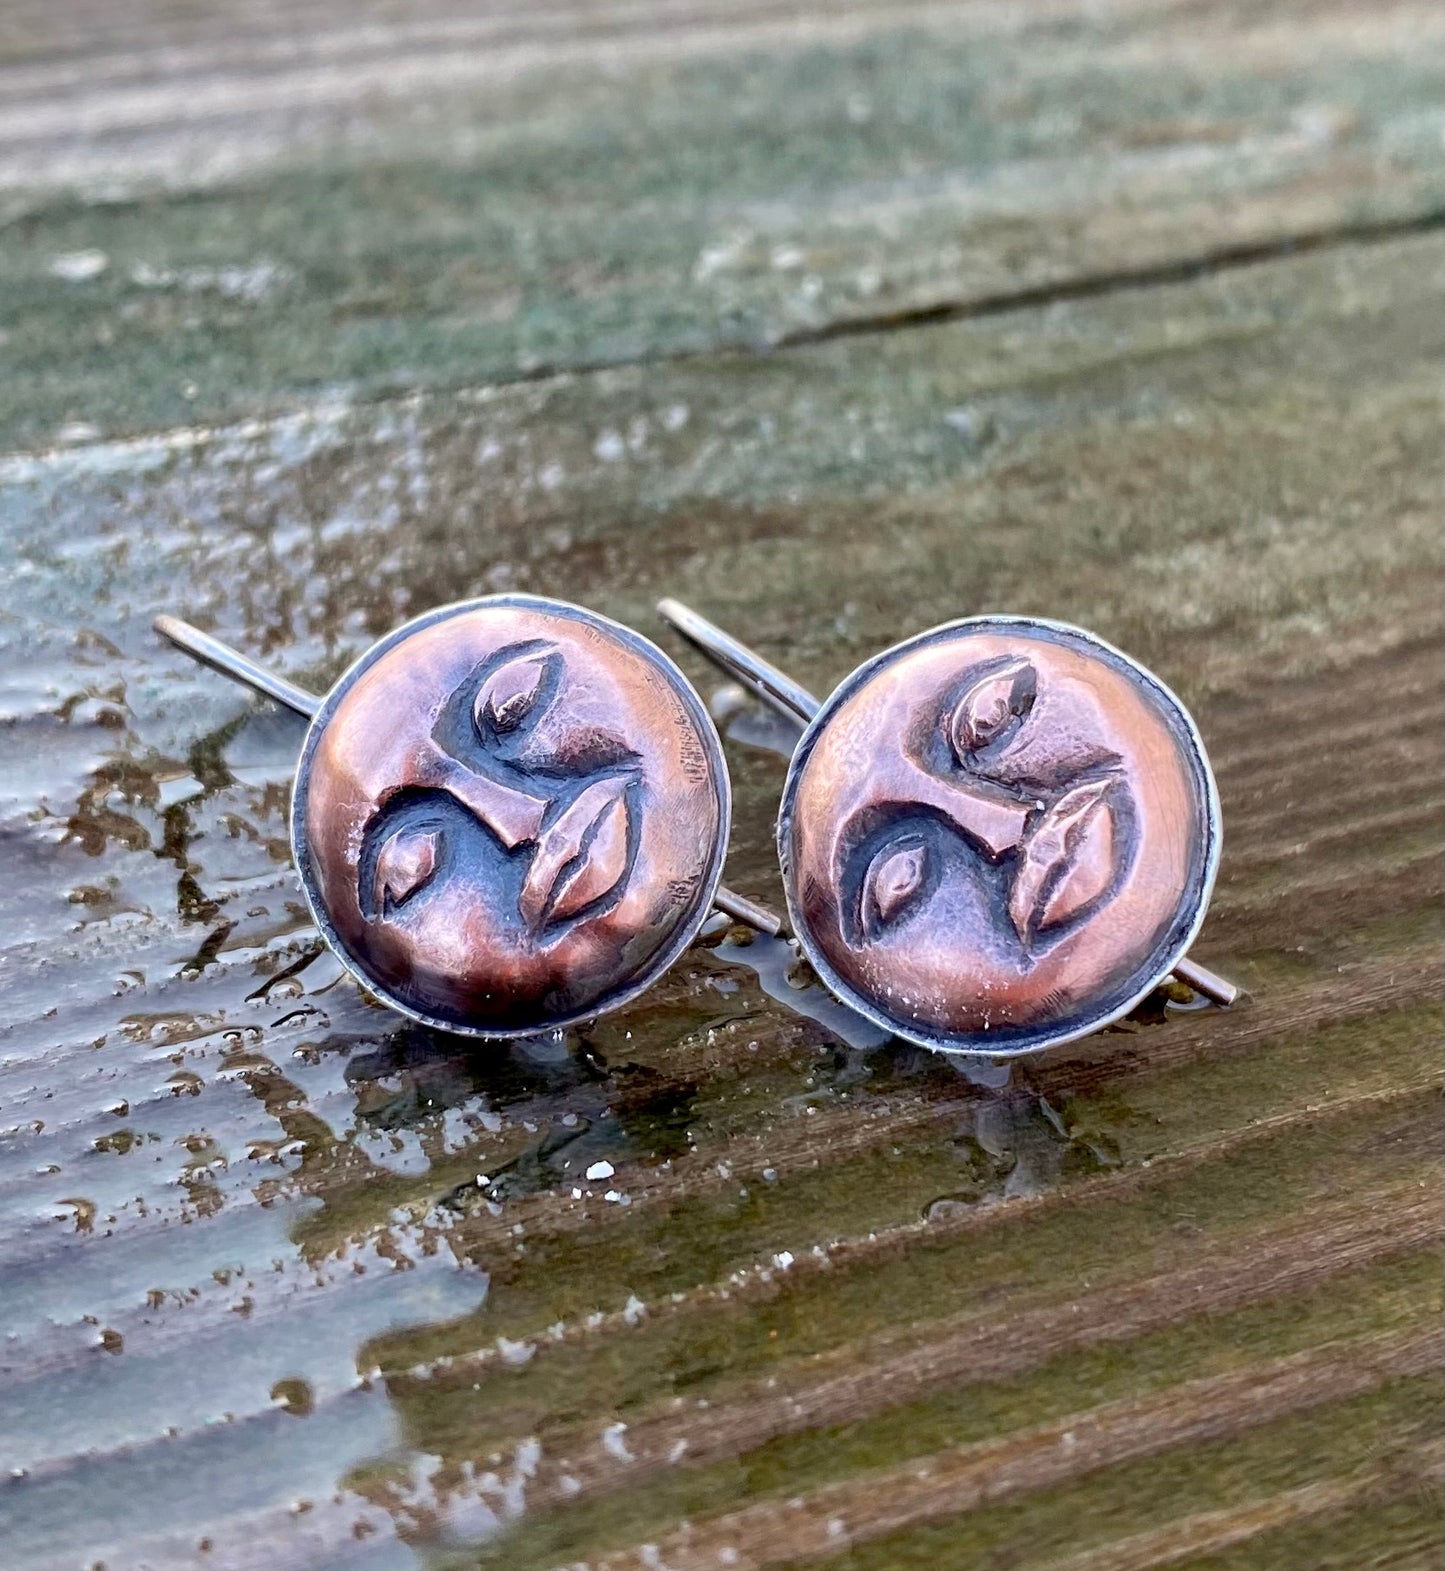 Face the Moon - Embossed Metal Earrings - Made to Order